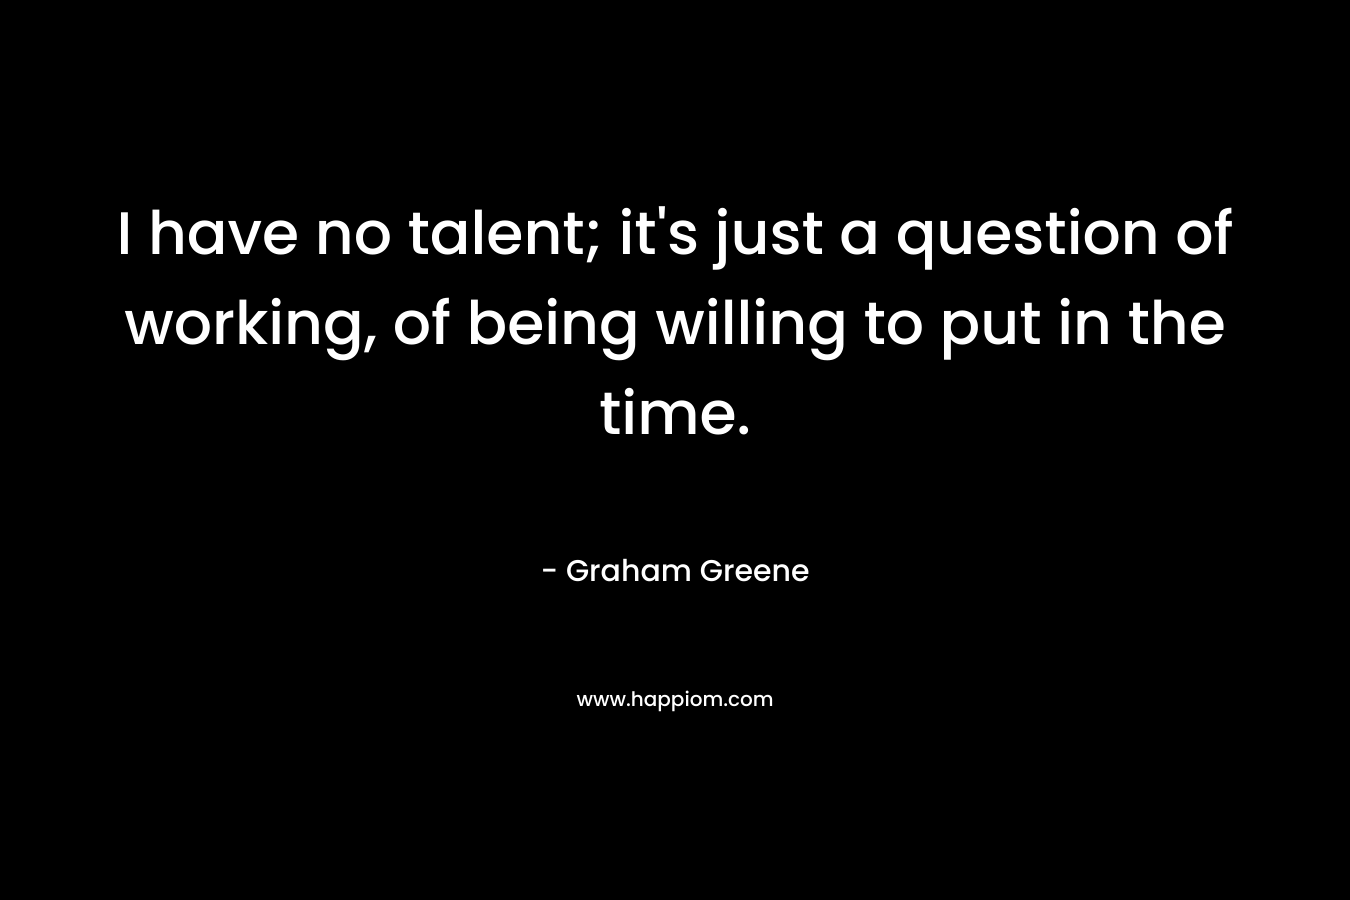 I have no talent; it’s just a question of working, of being willing to put in the time. – Graham Greene